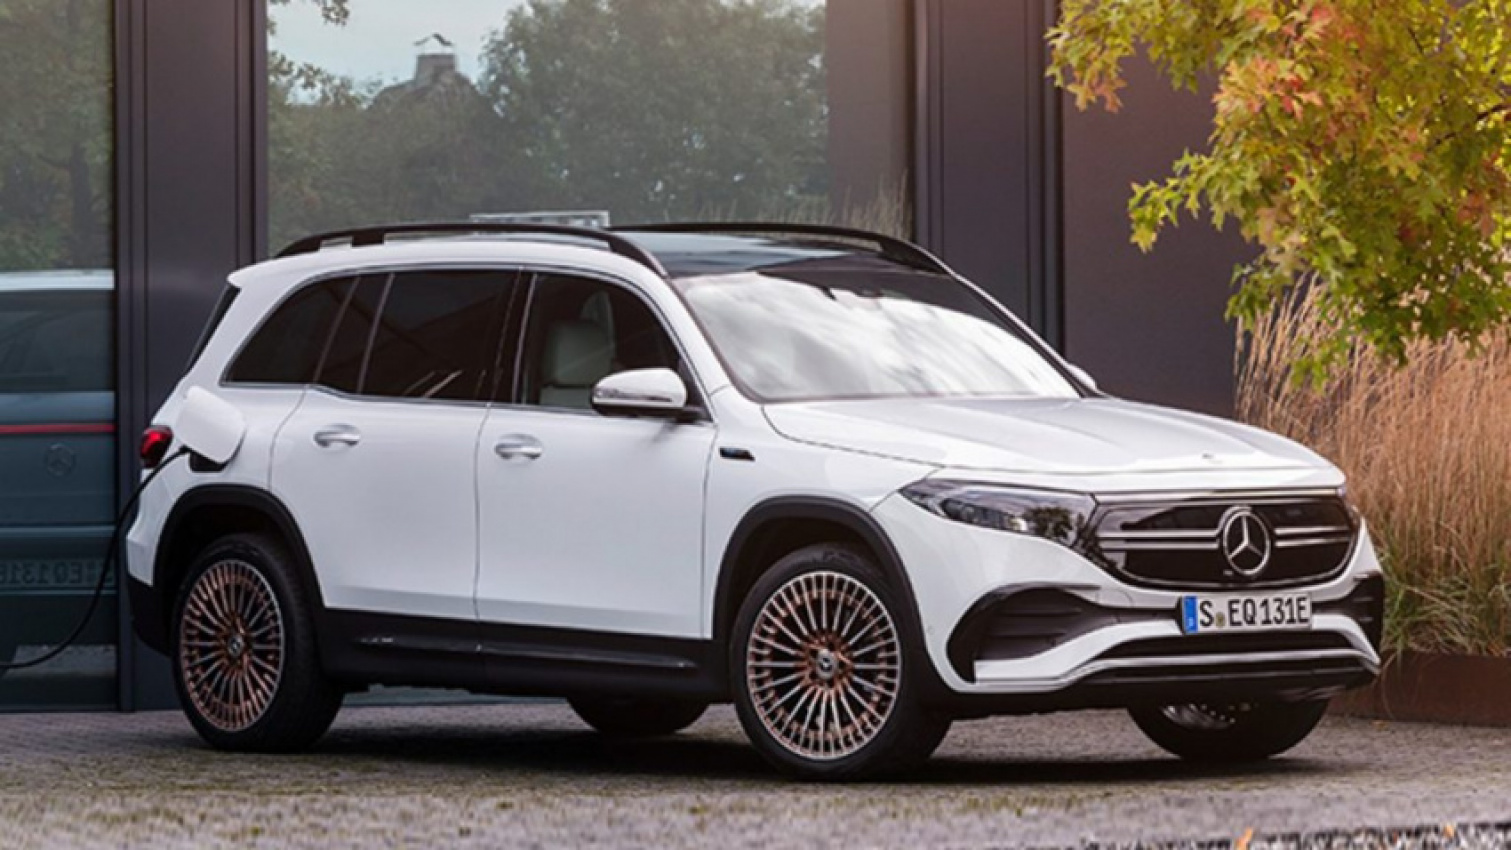 autos, cars, mercedes-benz, luxury suv, mercedes, small, midsize and large suv models, mercedes-benz stays inoffensive with the new eqb electric luxury suv